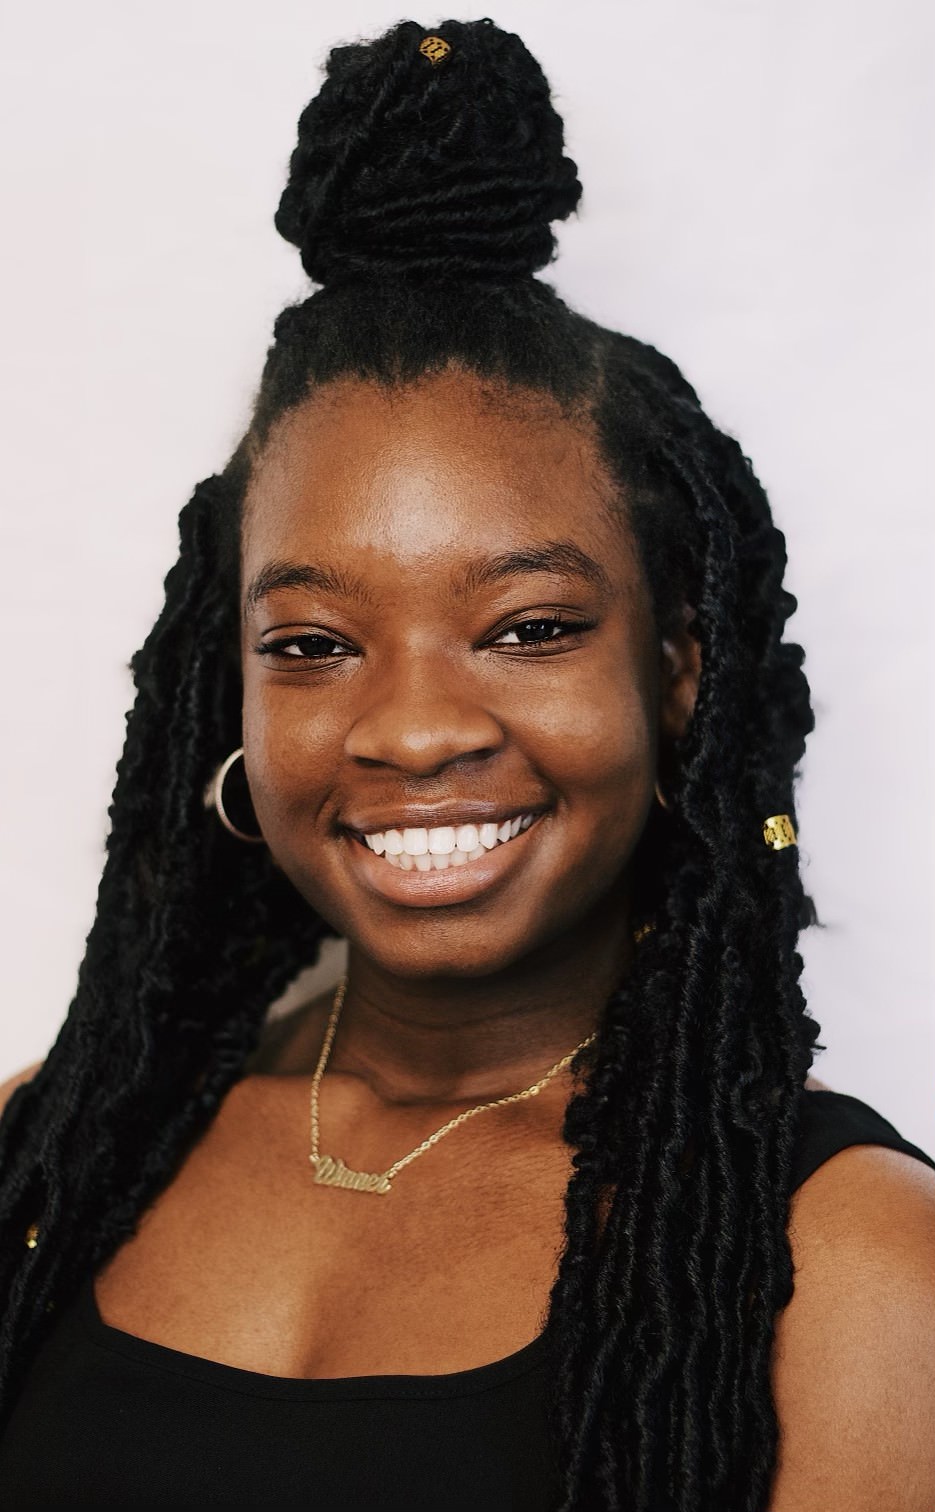 A young black woman smiling with dreadlocks named NexGen Yancey.